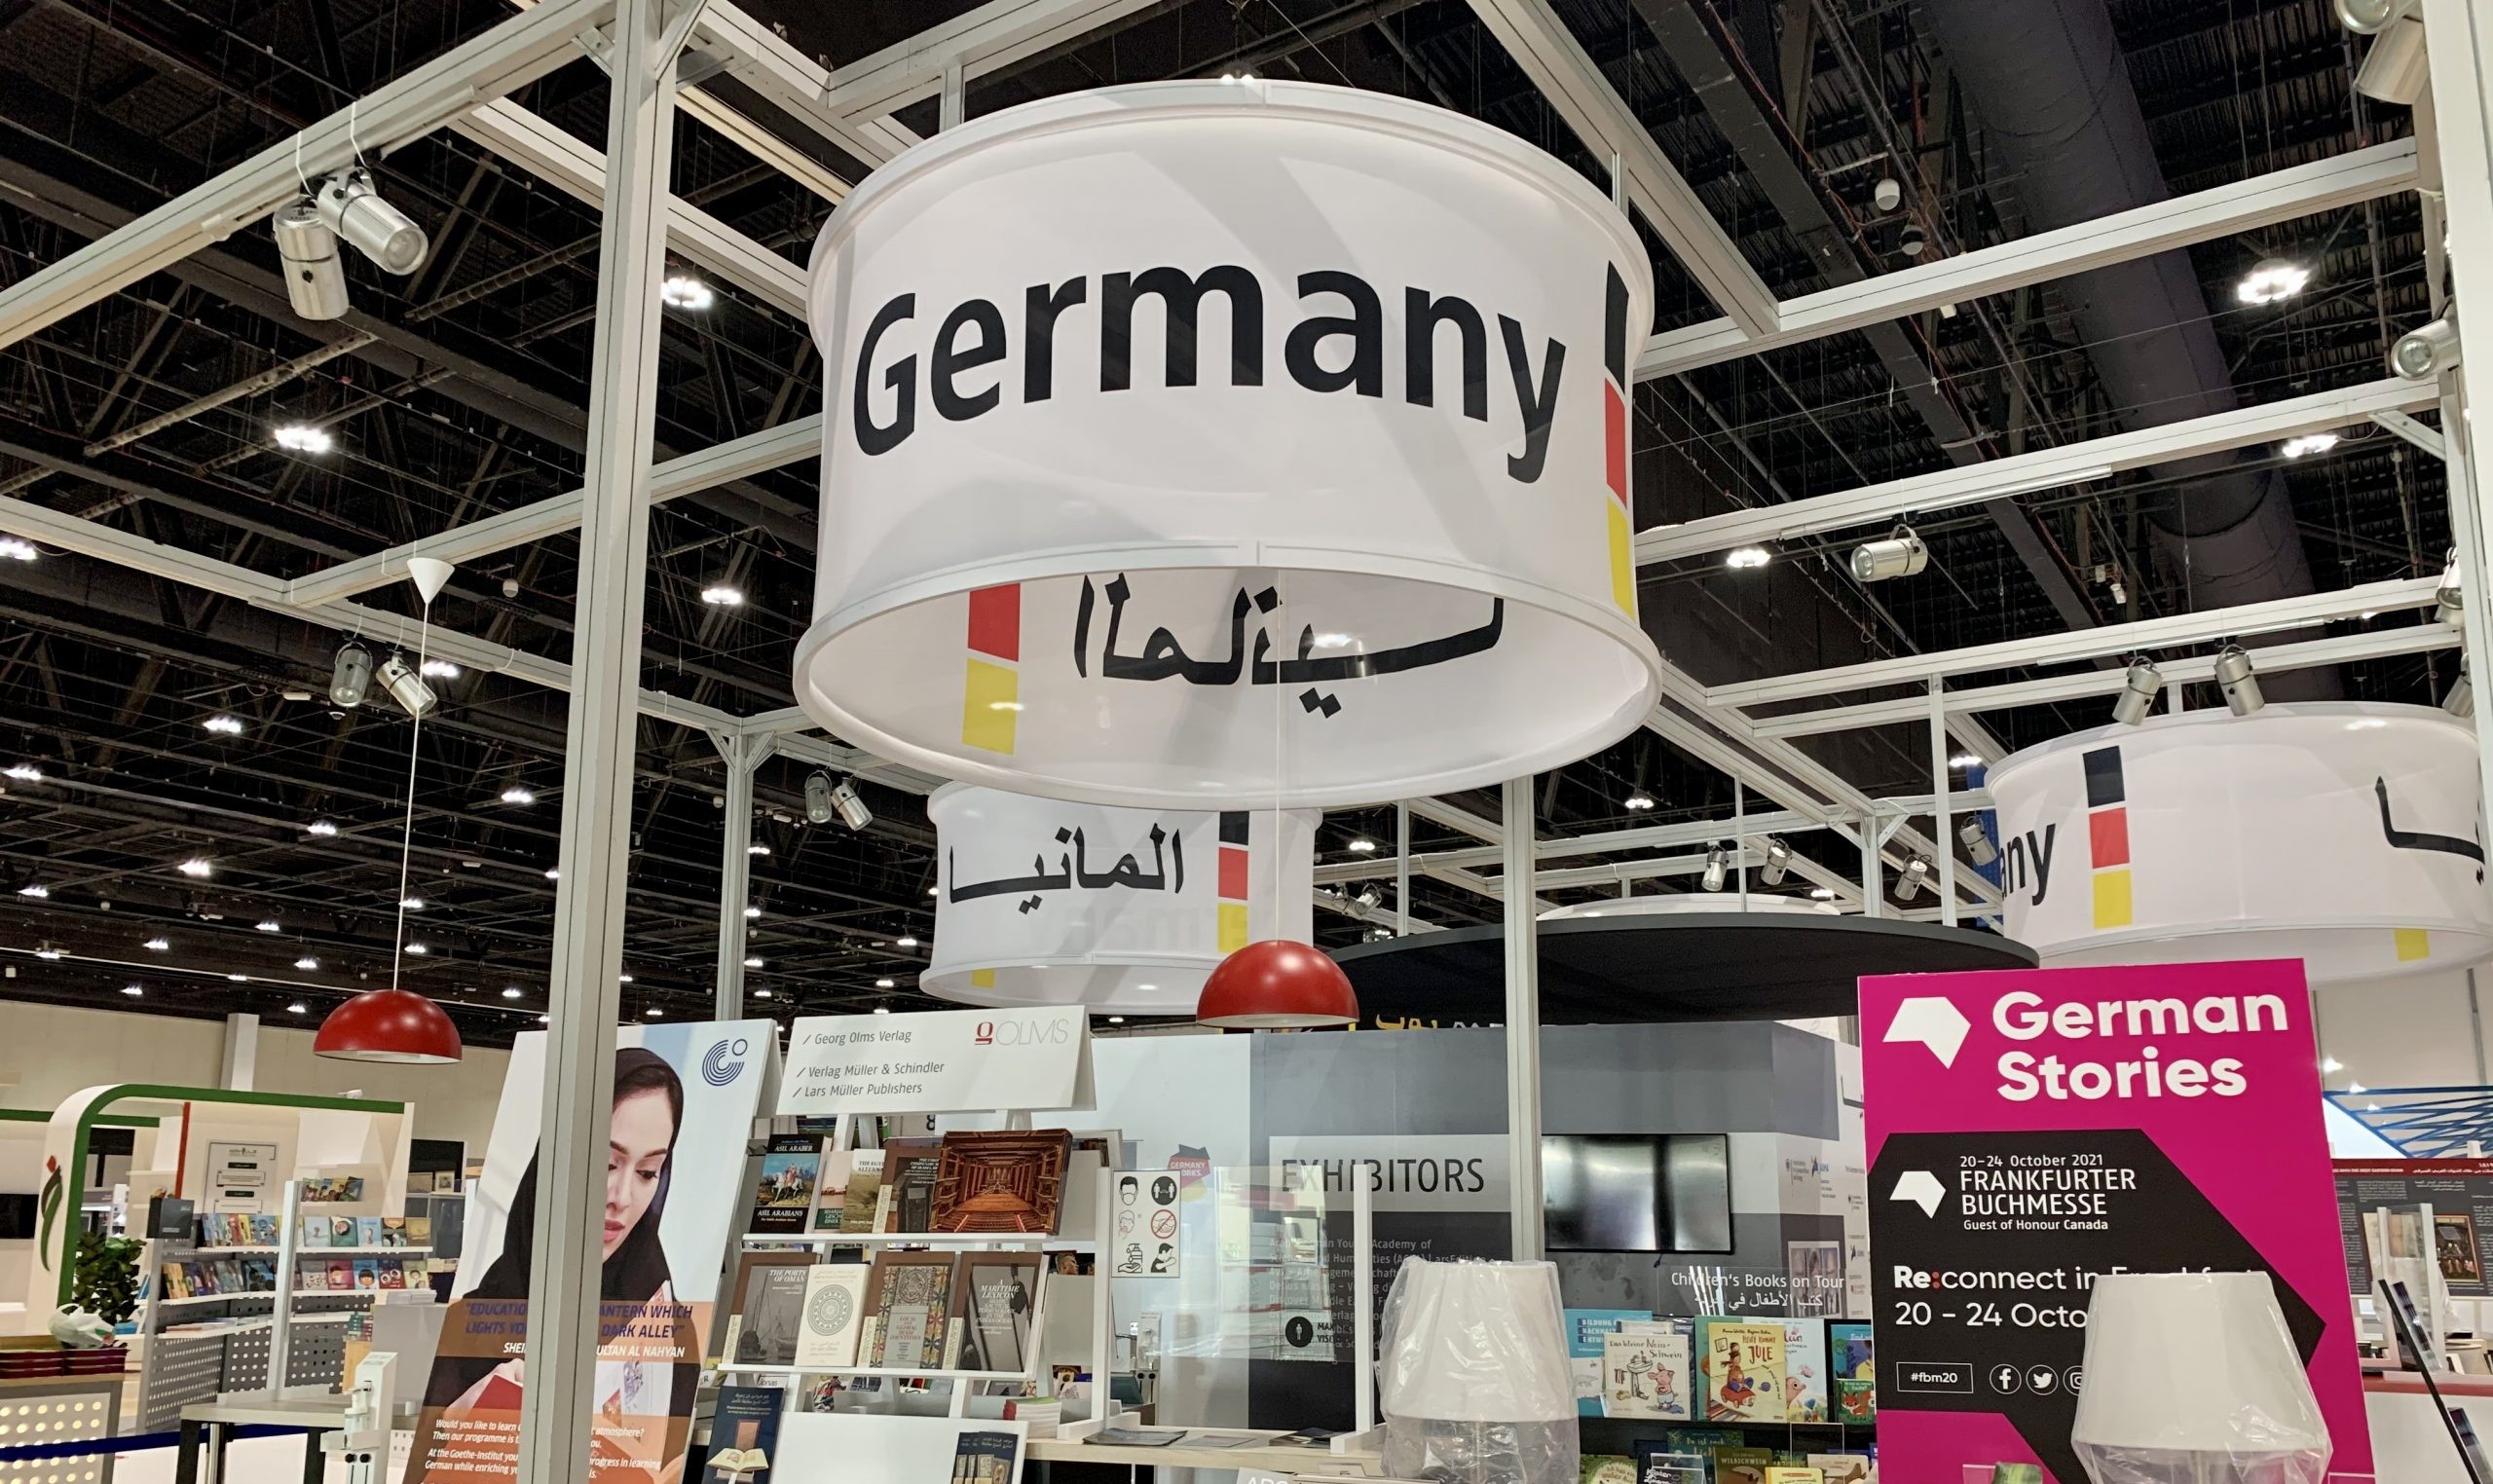 At the Abu Dhabi Book Fair, the problems of the Arab book market and Arab literature were discussed with astonishing frankness. The book fair has also become an international event, on a scale not seen since the Arab revolutions.